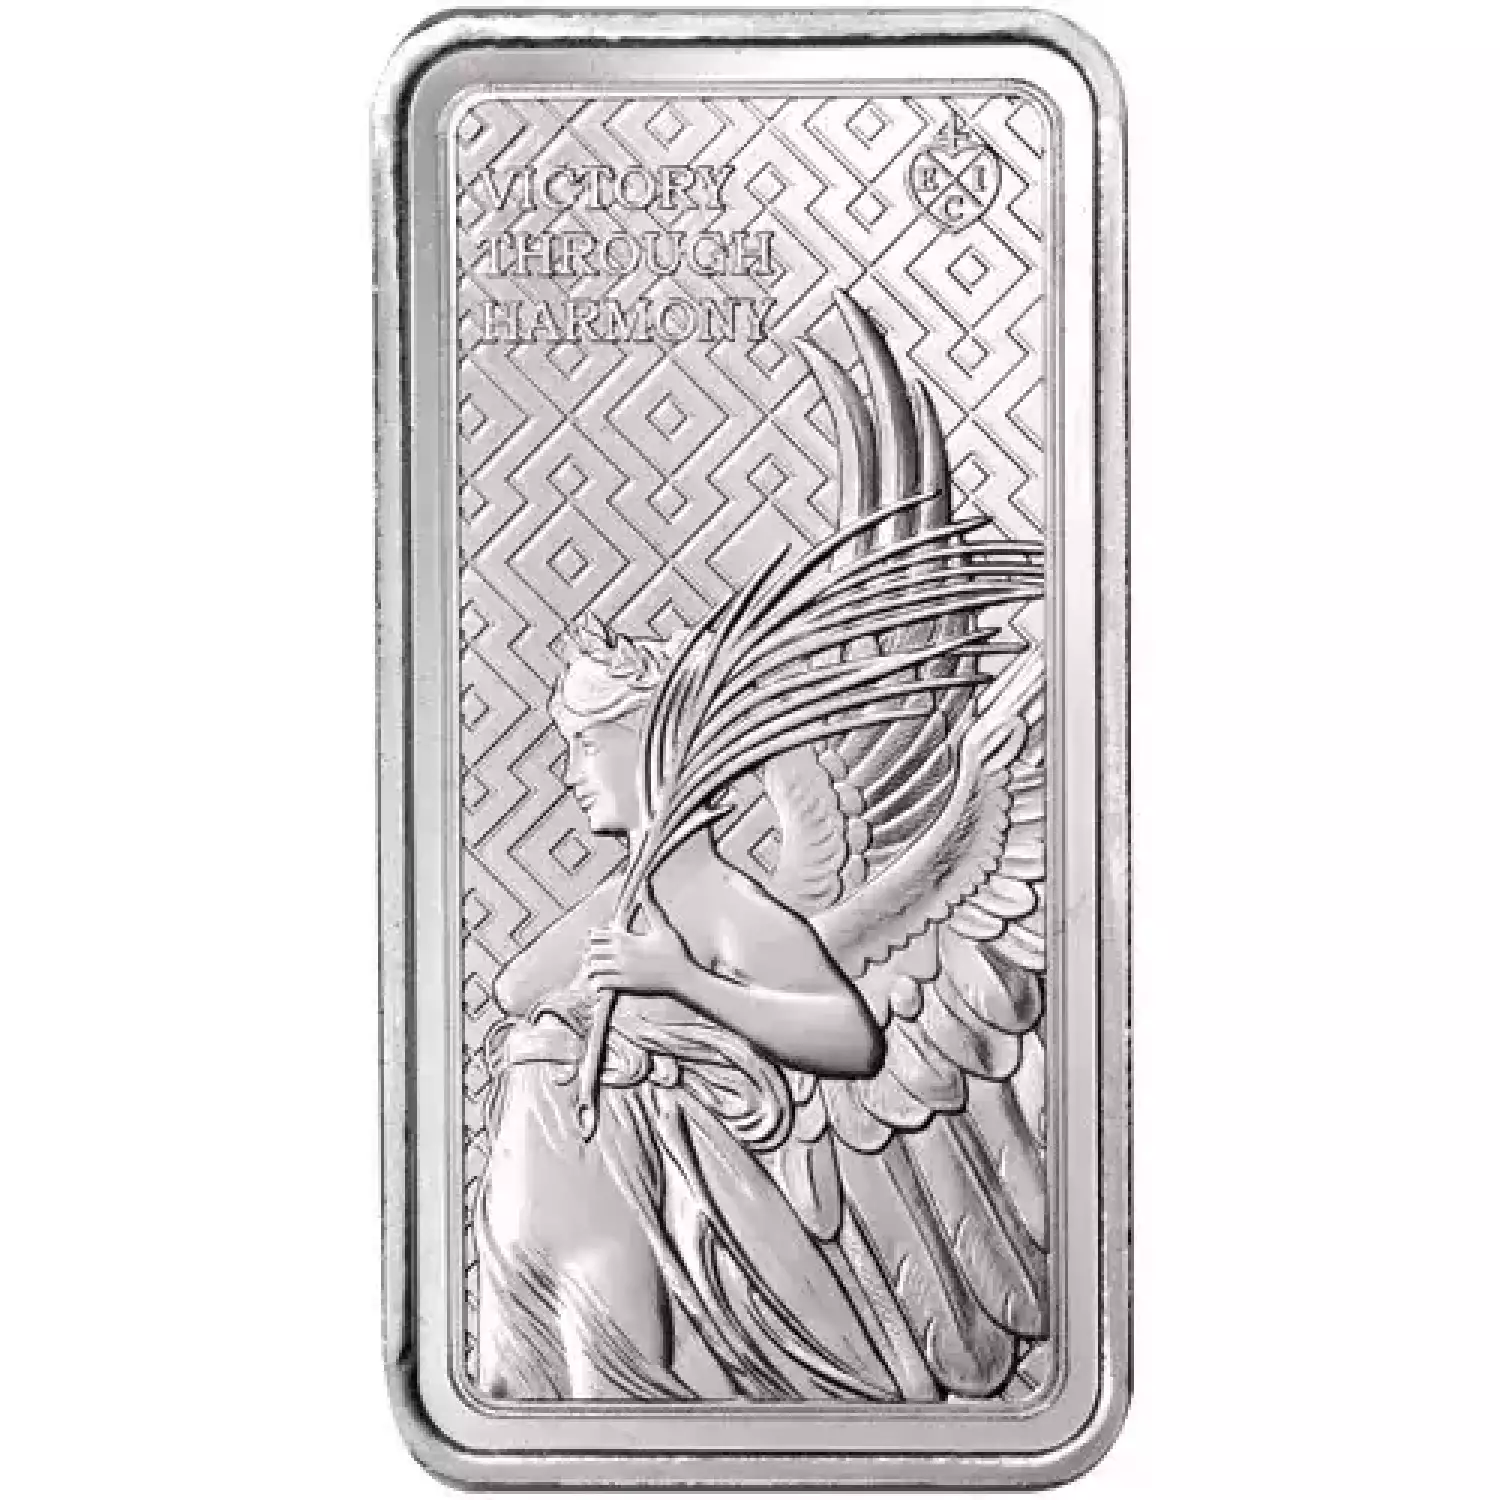 2022 10 oz St. Helena Rectangular Silver Queen’s Virtues Victory coin